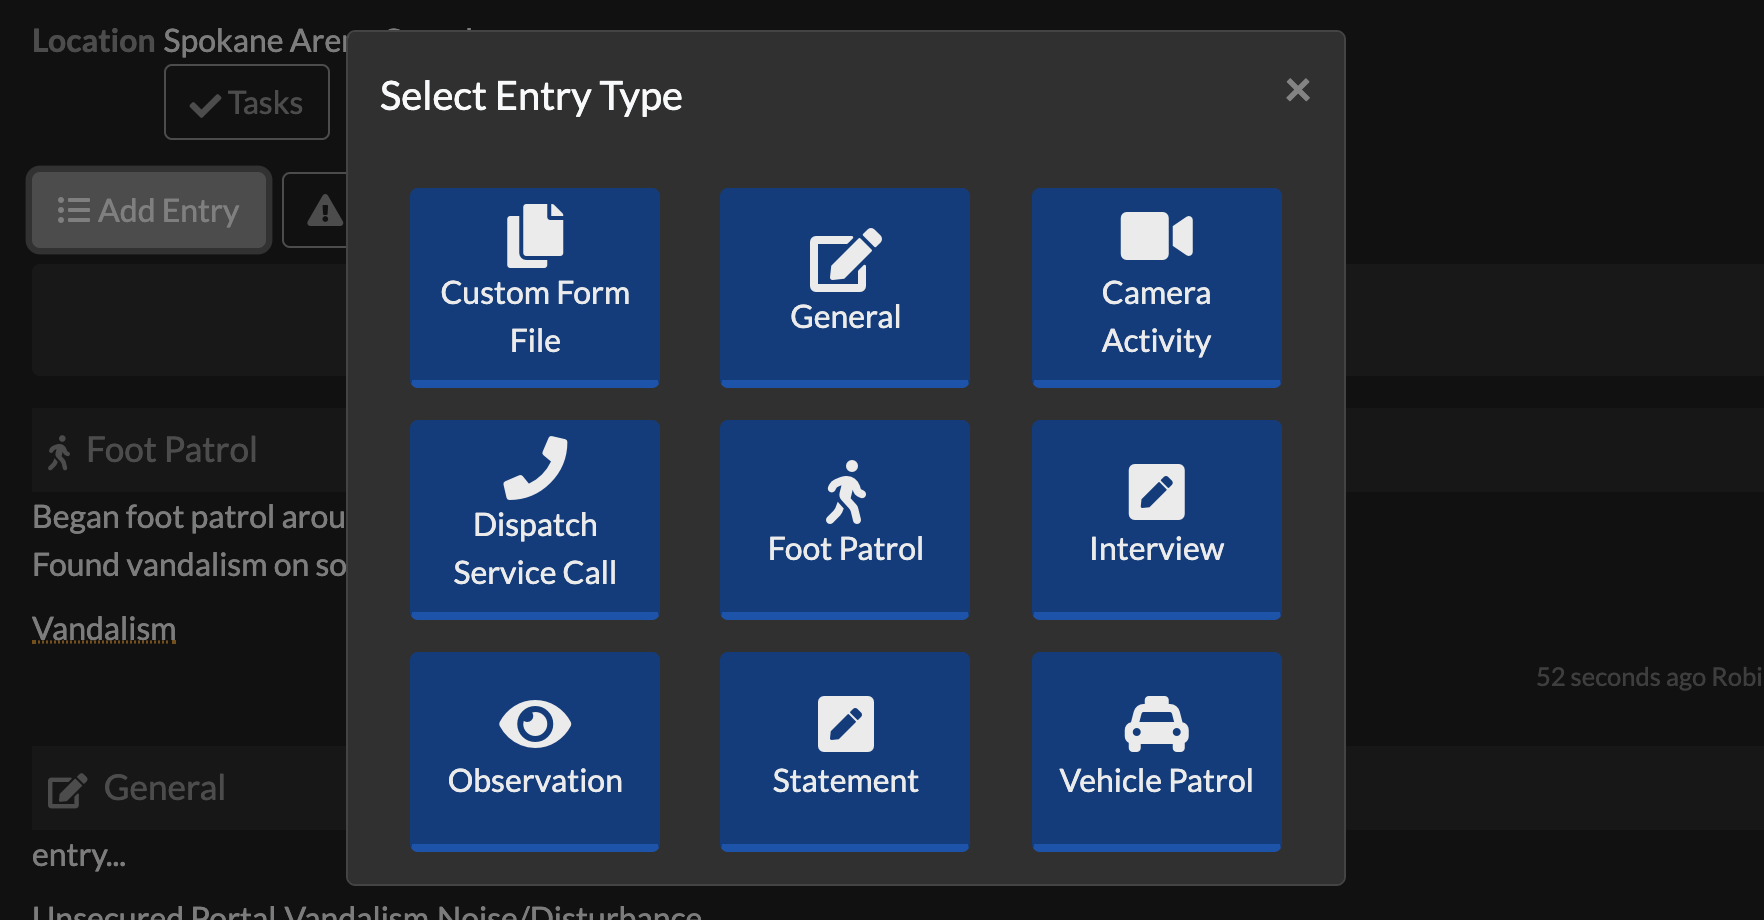 Select Entry Type Options